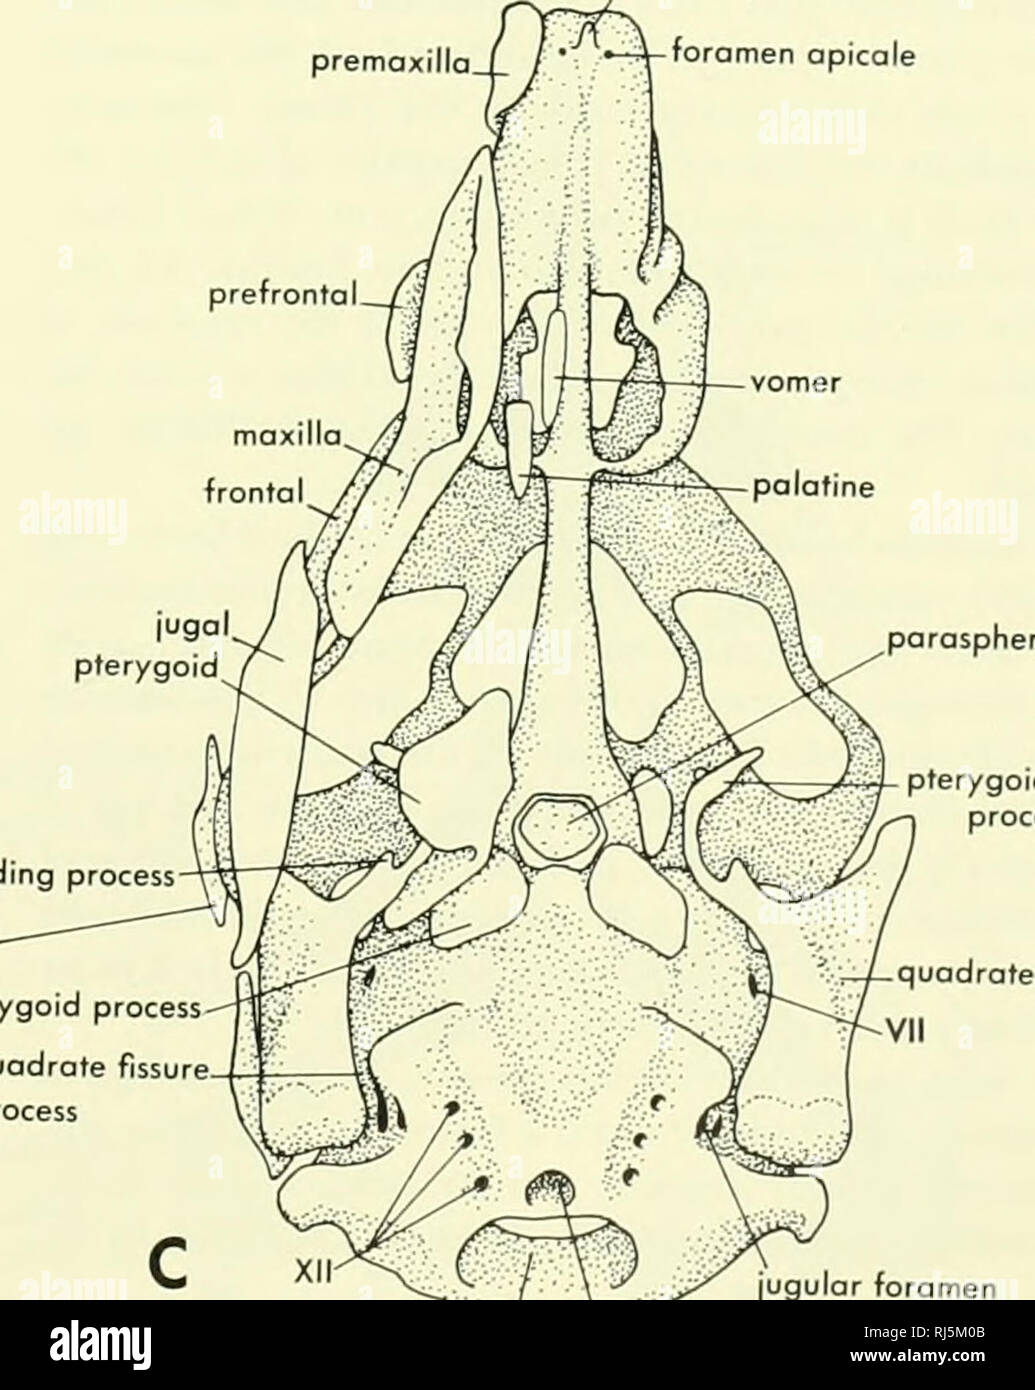 . Chordate morphology. Morphology (Animals); Chordata. premaxilla. prefronta prenasal process foramen apicole parosphenoid prootic fenestra. pterygoid process ascending process —postorbital. basipterygoid process cranioquadrote fissure pterygoid process squamosal   jugular  endolymphatic foramen t&quot;--'^ ,  i foramen magnum notocriord canal Figure 4-12. Chondrocranium and some of the dermal bone rudiments observed in the head of an embryo (13-mm head length) of CrococJ/7us biporcofus. (After Shiino, 1914) Bird The head skeleton of the chicken, as an example of the bird, contributes several Stock Photo